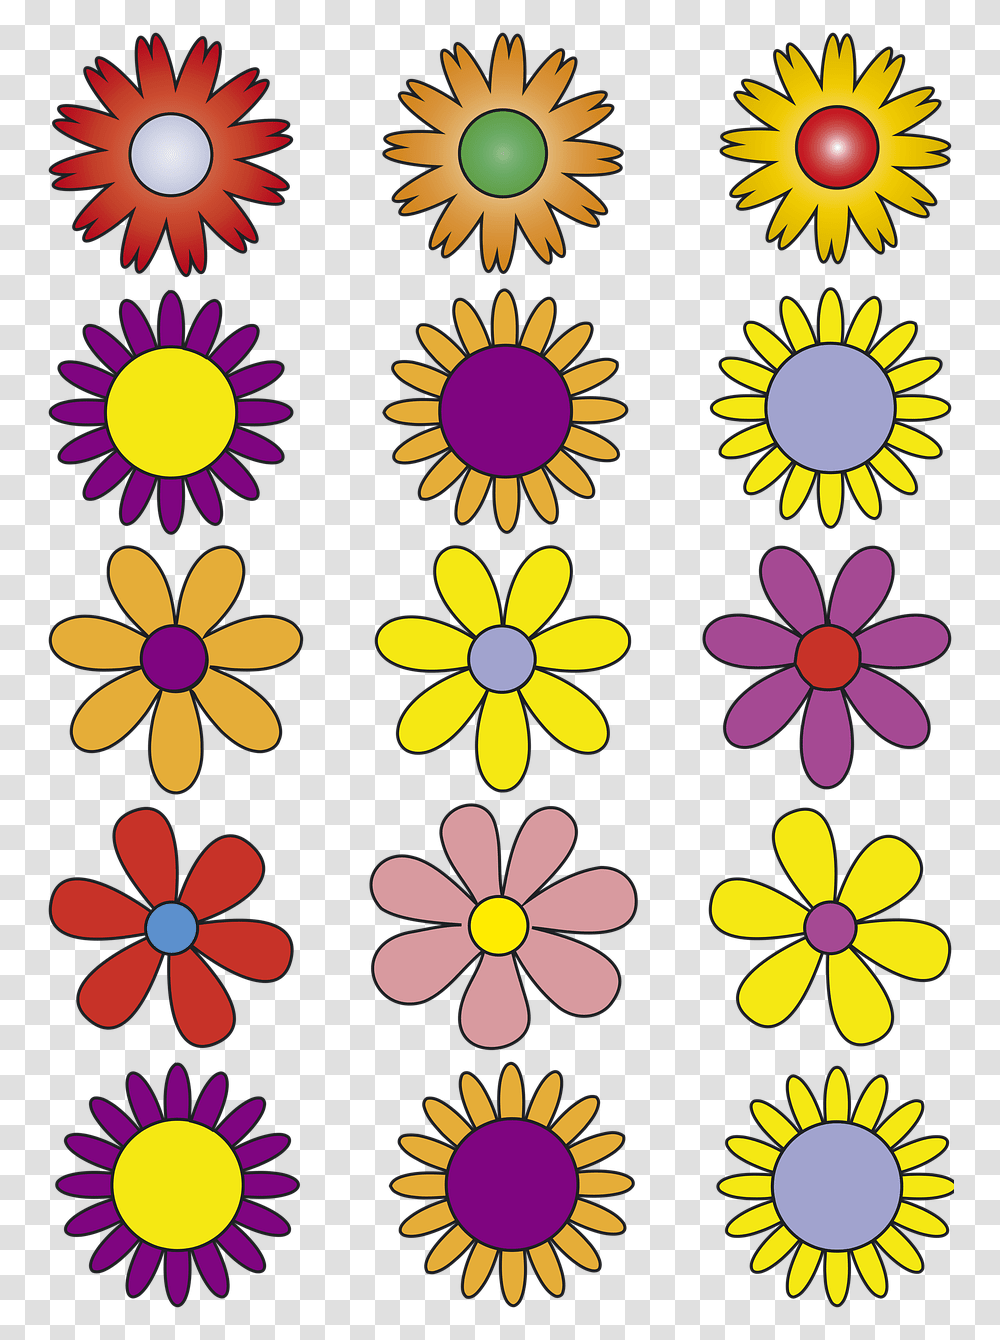 Flowers Vector Flowers Abstract Free Picture Bunga Vektor, Plant, Blossom Transparent Png